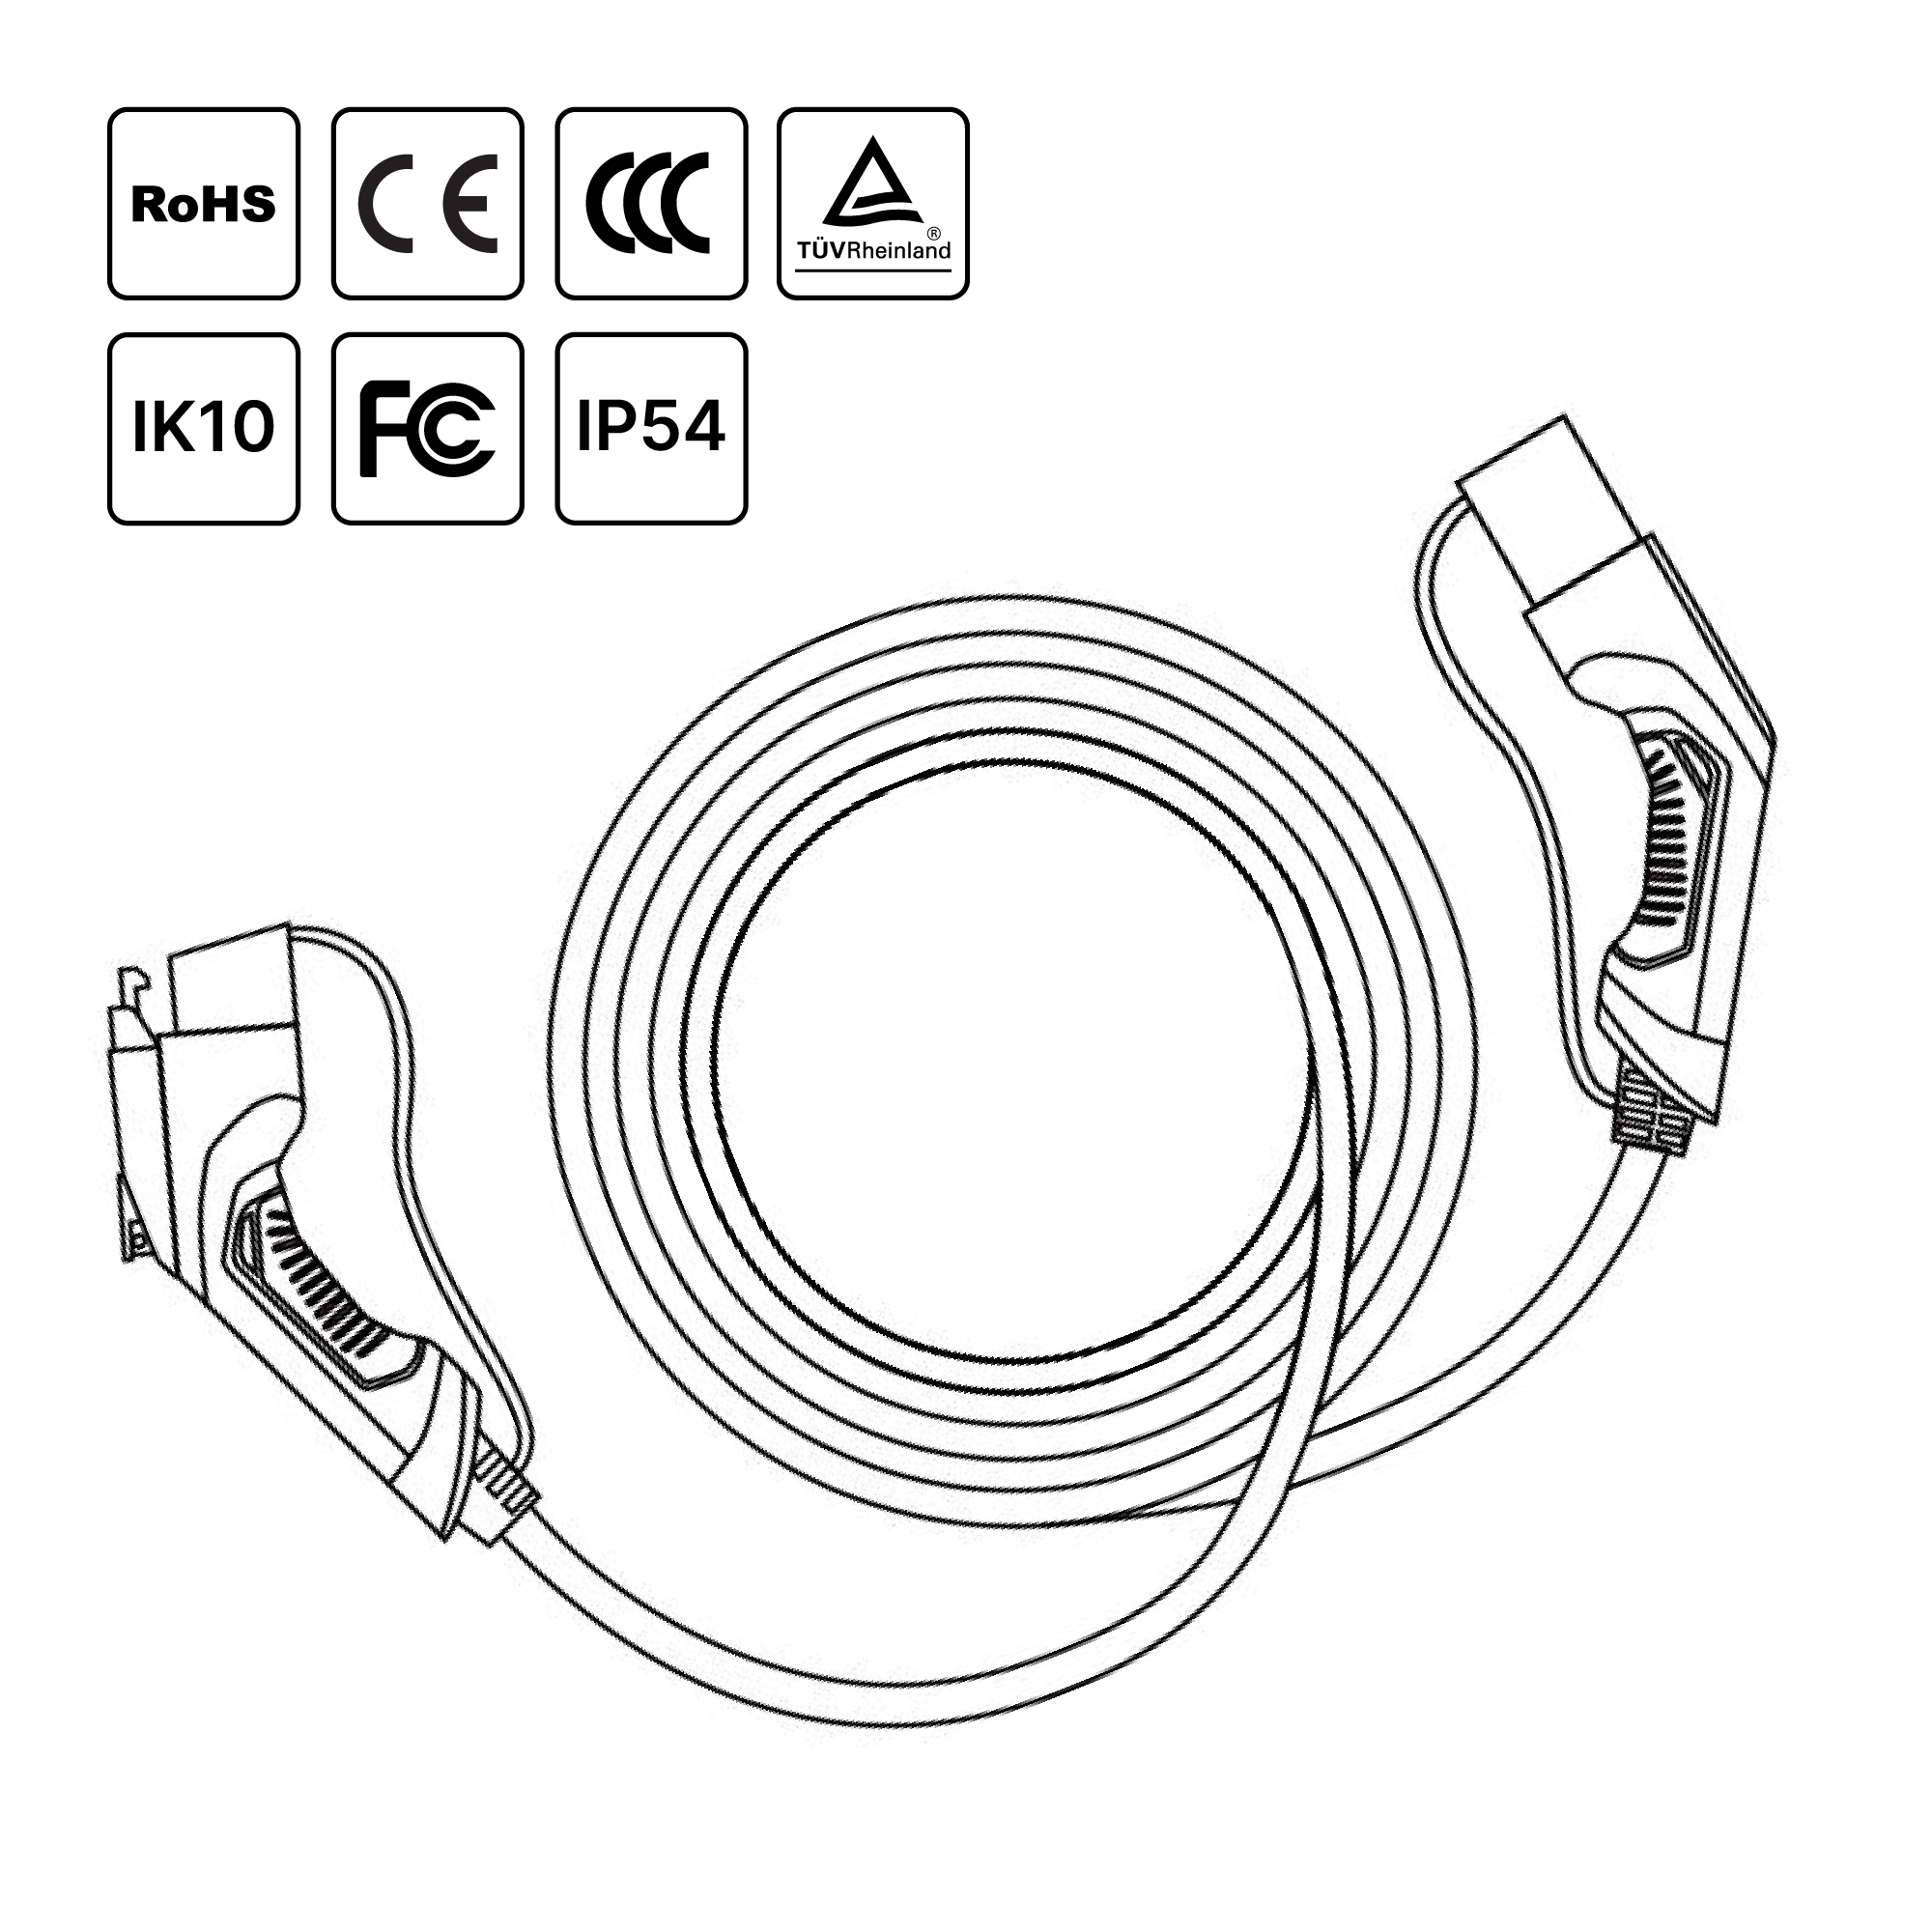 EV Public Charging Cable, Type 1 to Type 2, 16/32 Amp, 3.6/7.2 kW